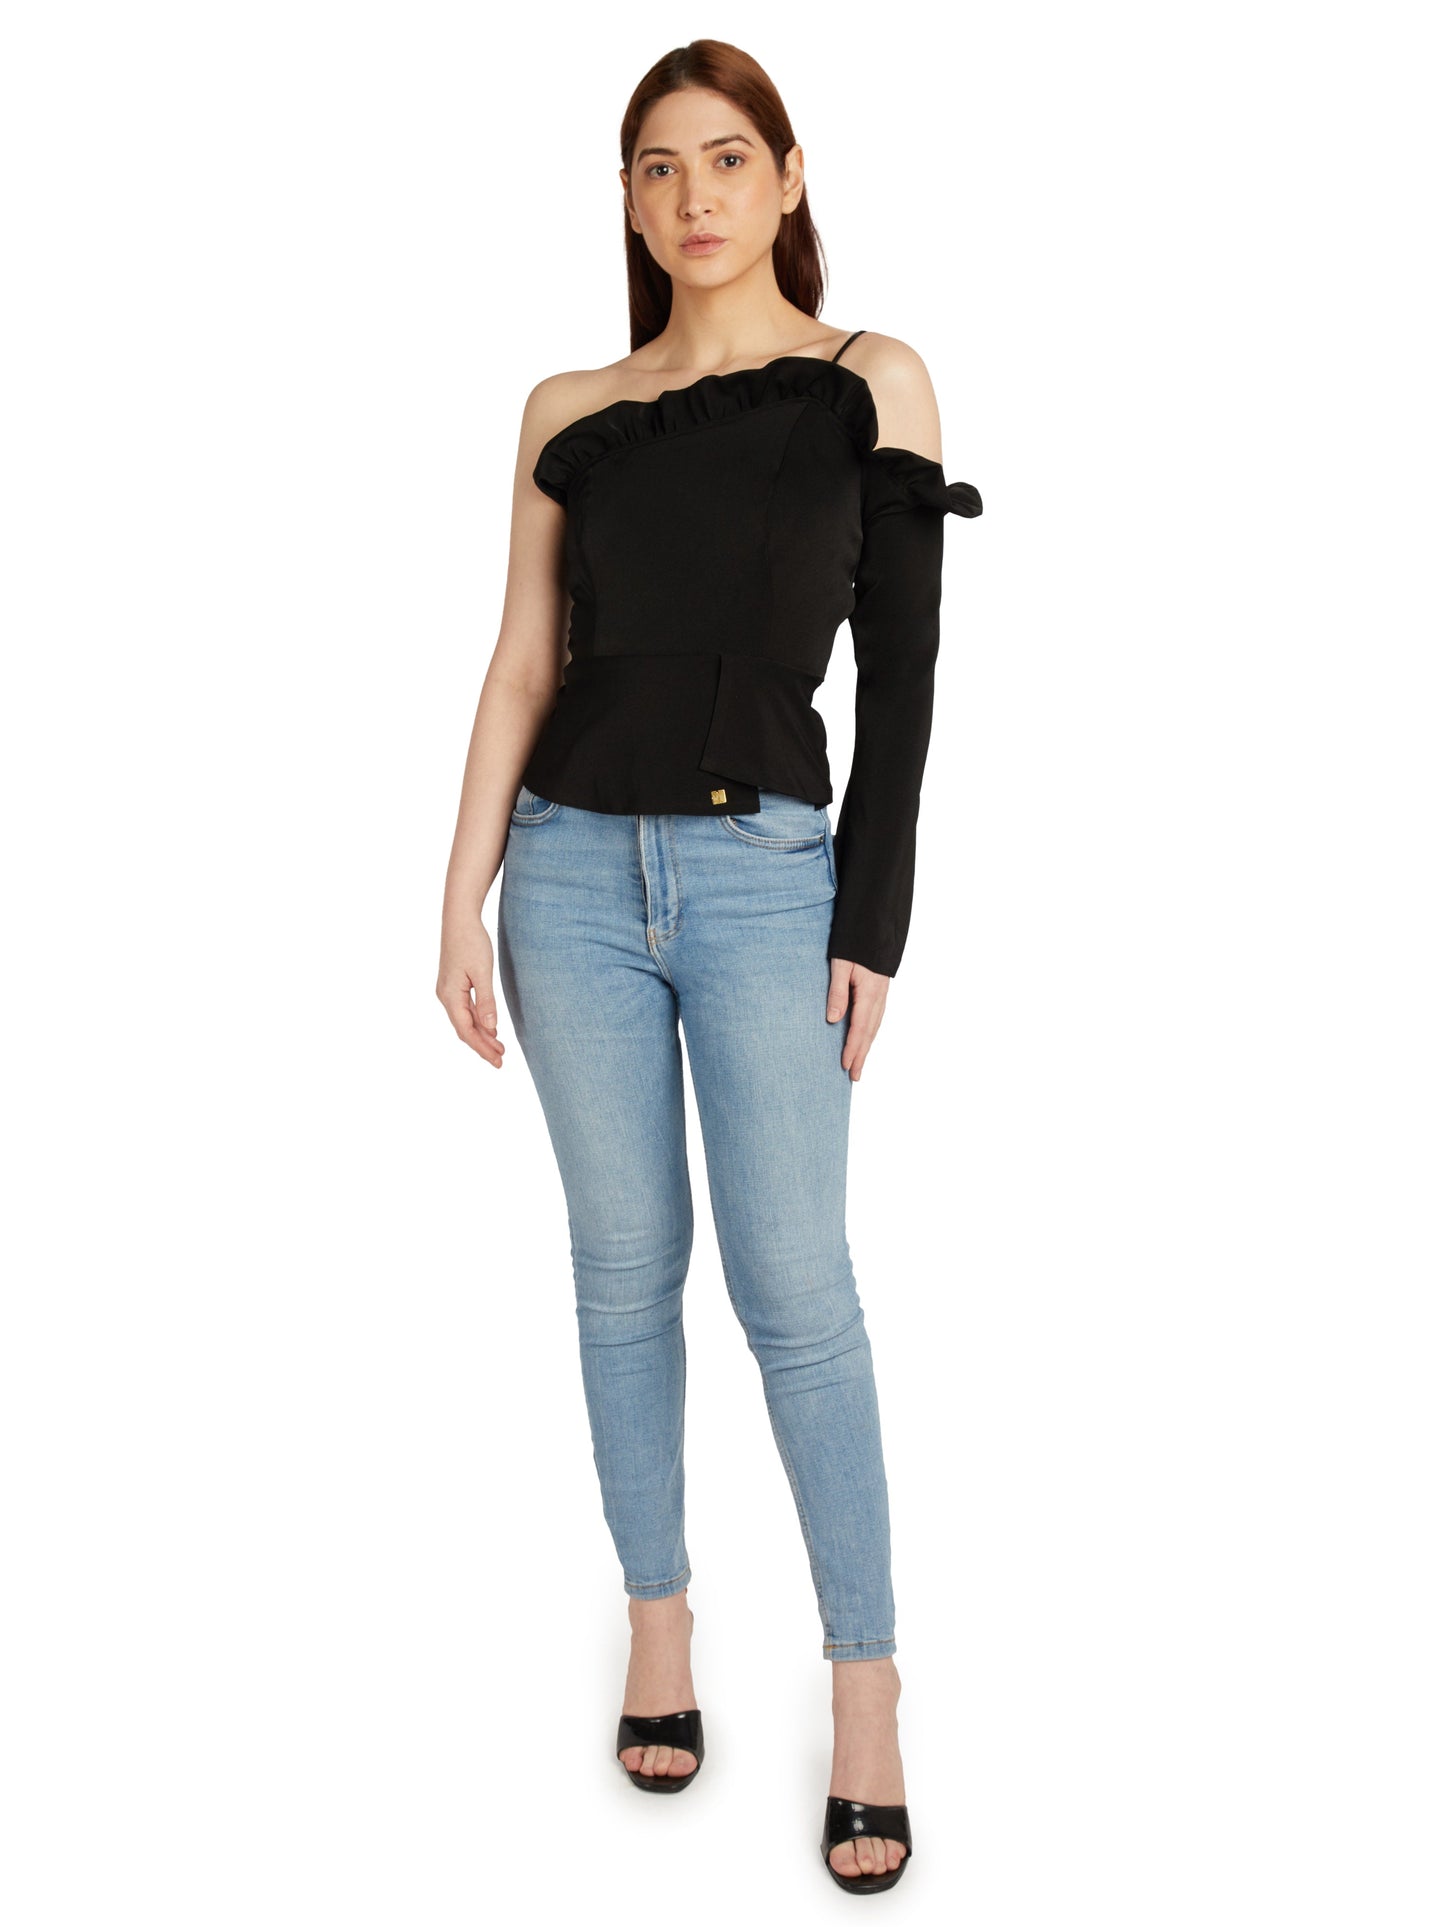 ONE SLEEVE COLD SHOULDER TOP WITH RUFFLE DETAIL ON NECK